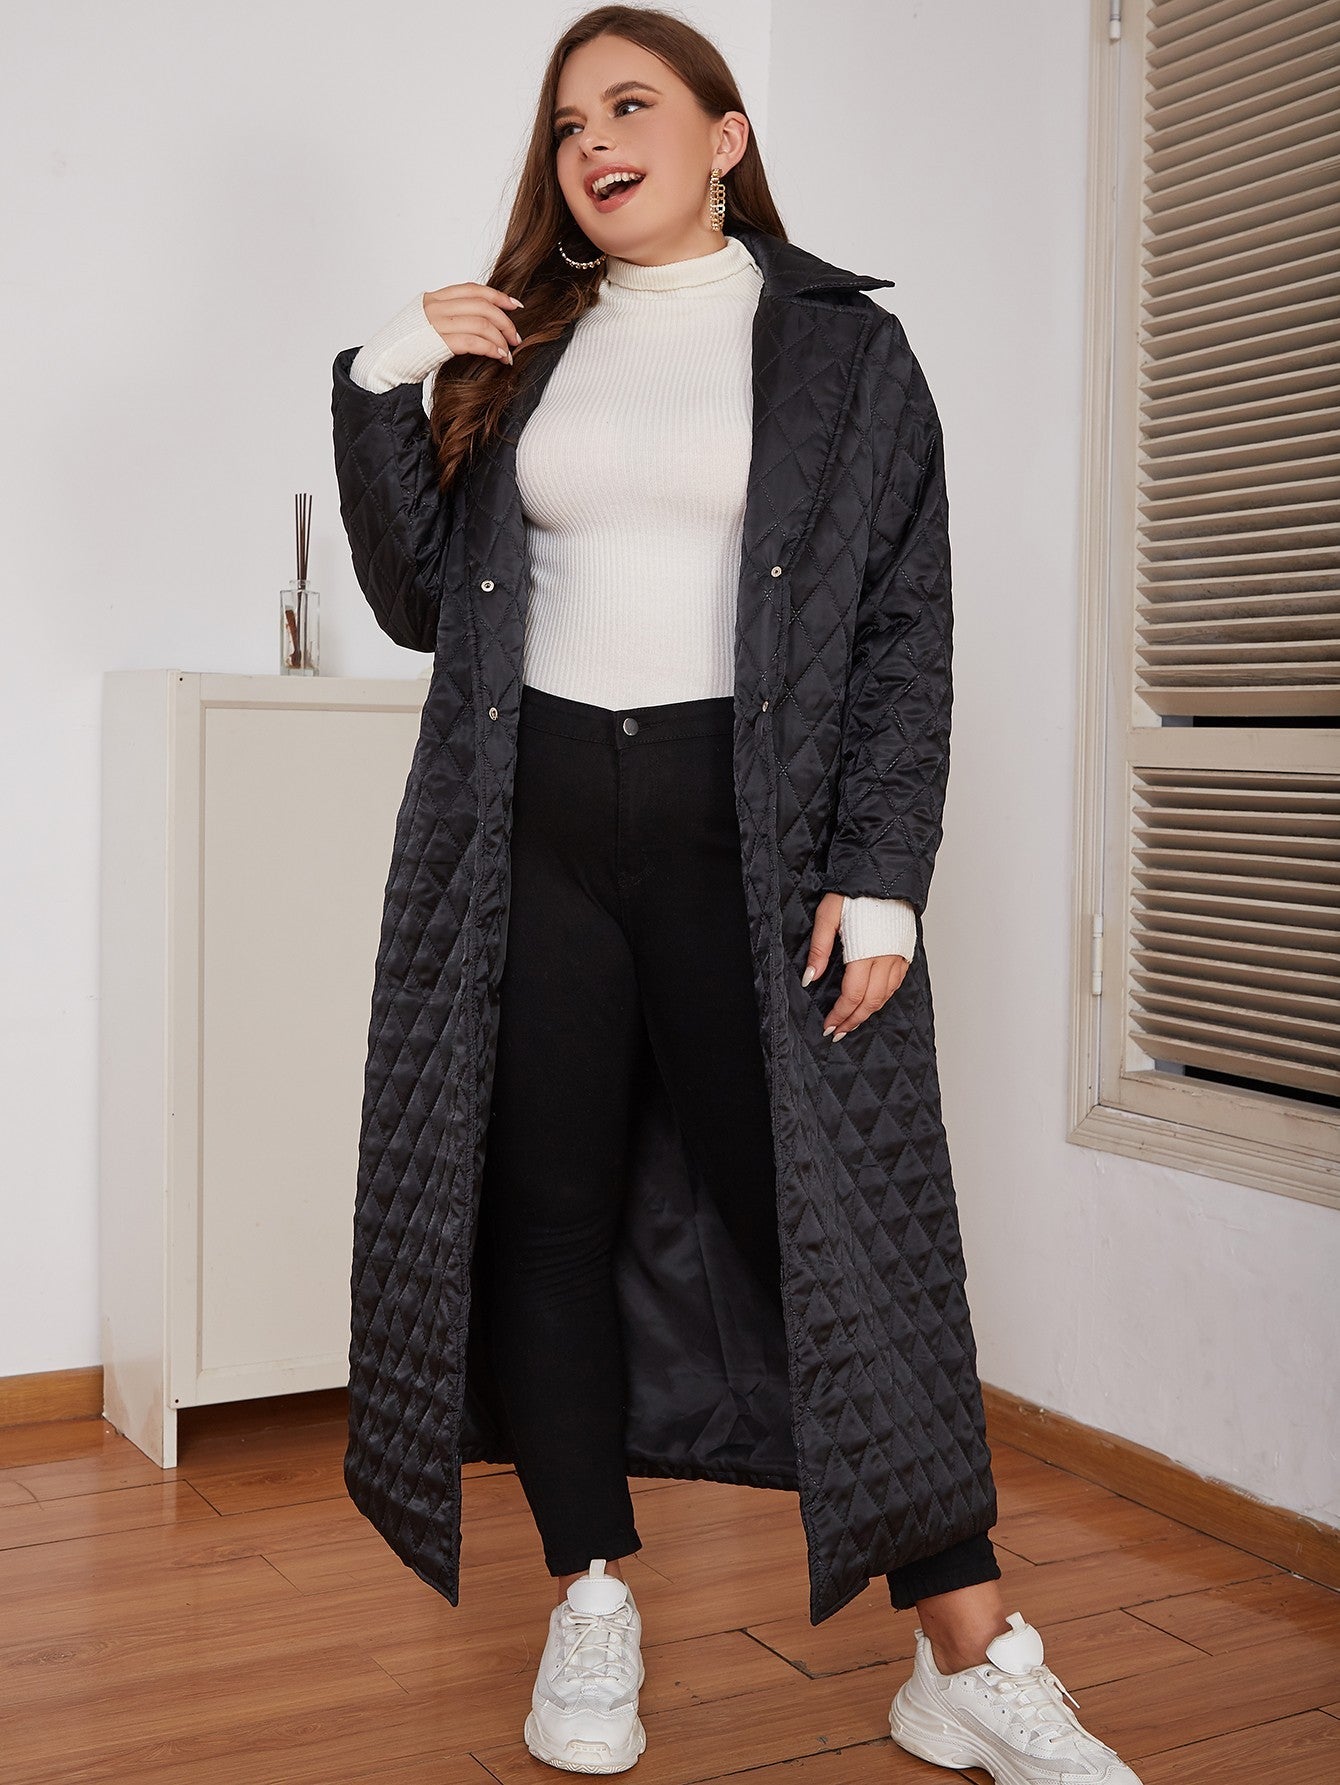 Women's Black Plus Size Winter Jacket Snap Front Lapel Collar Quilted Duster Coat_2